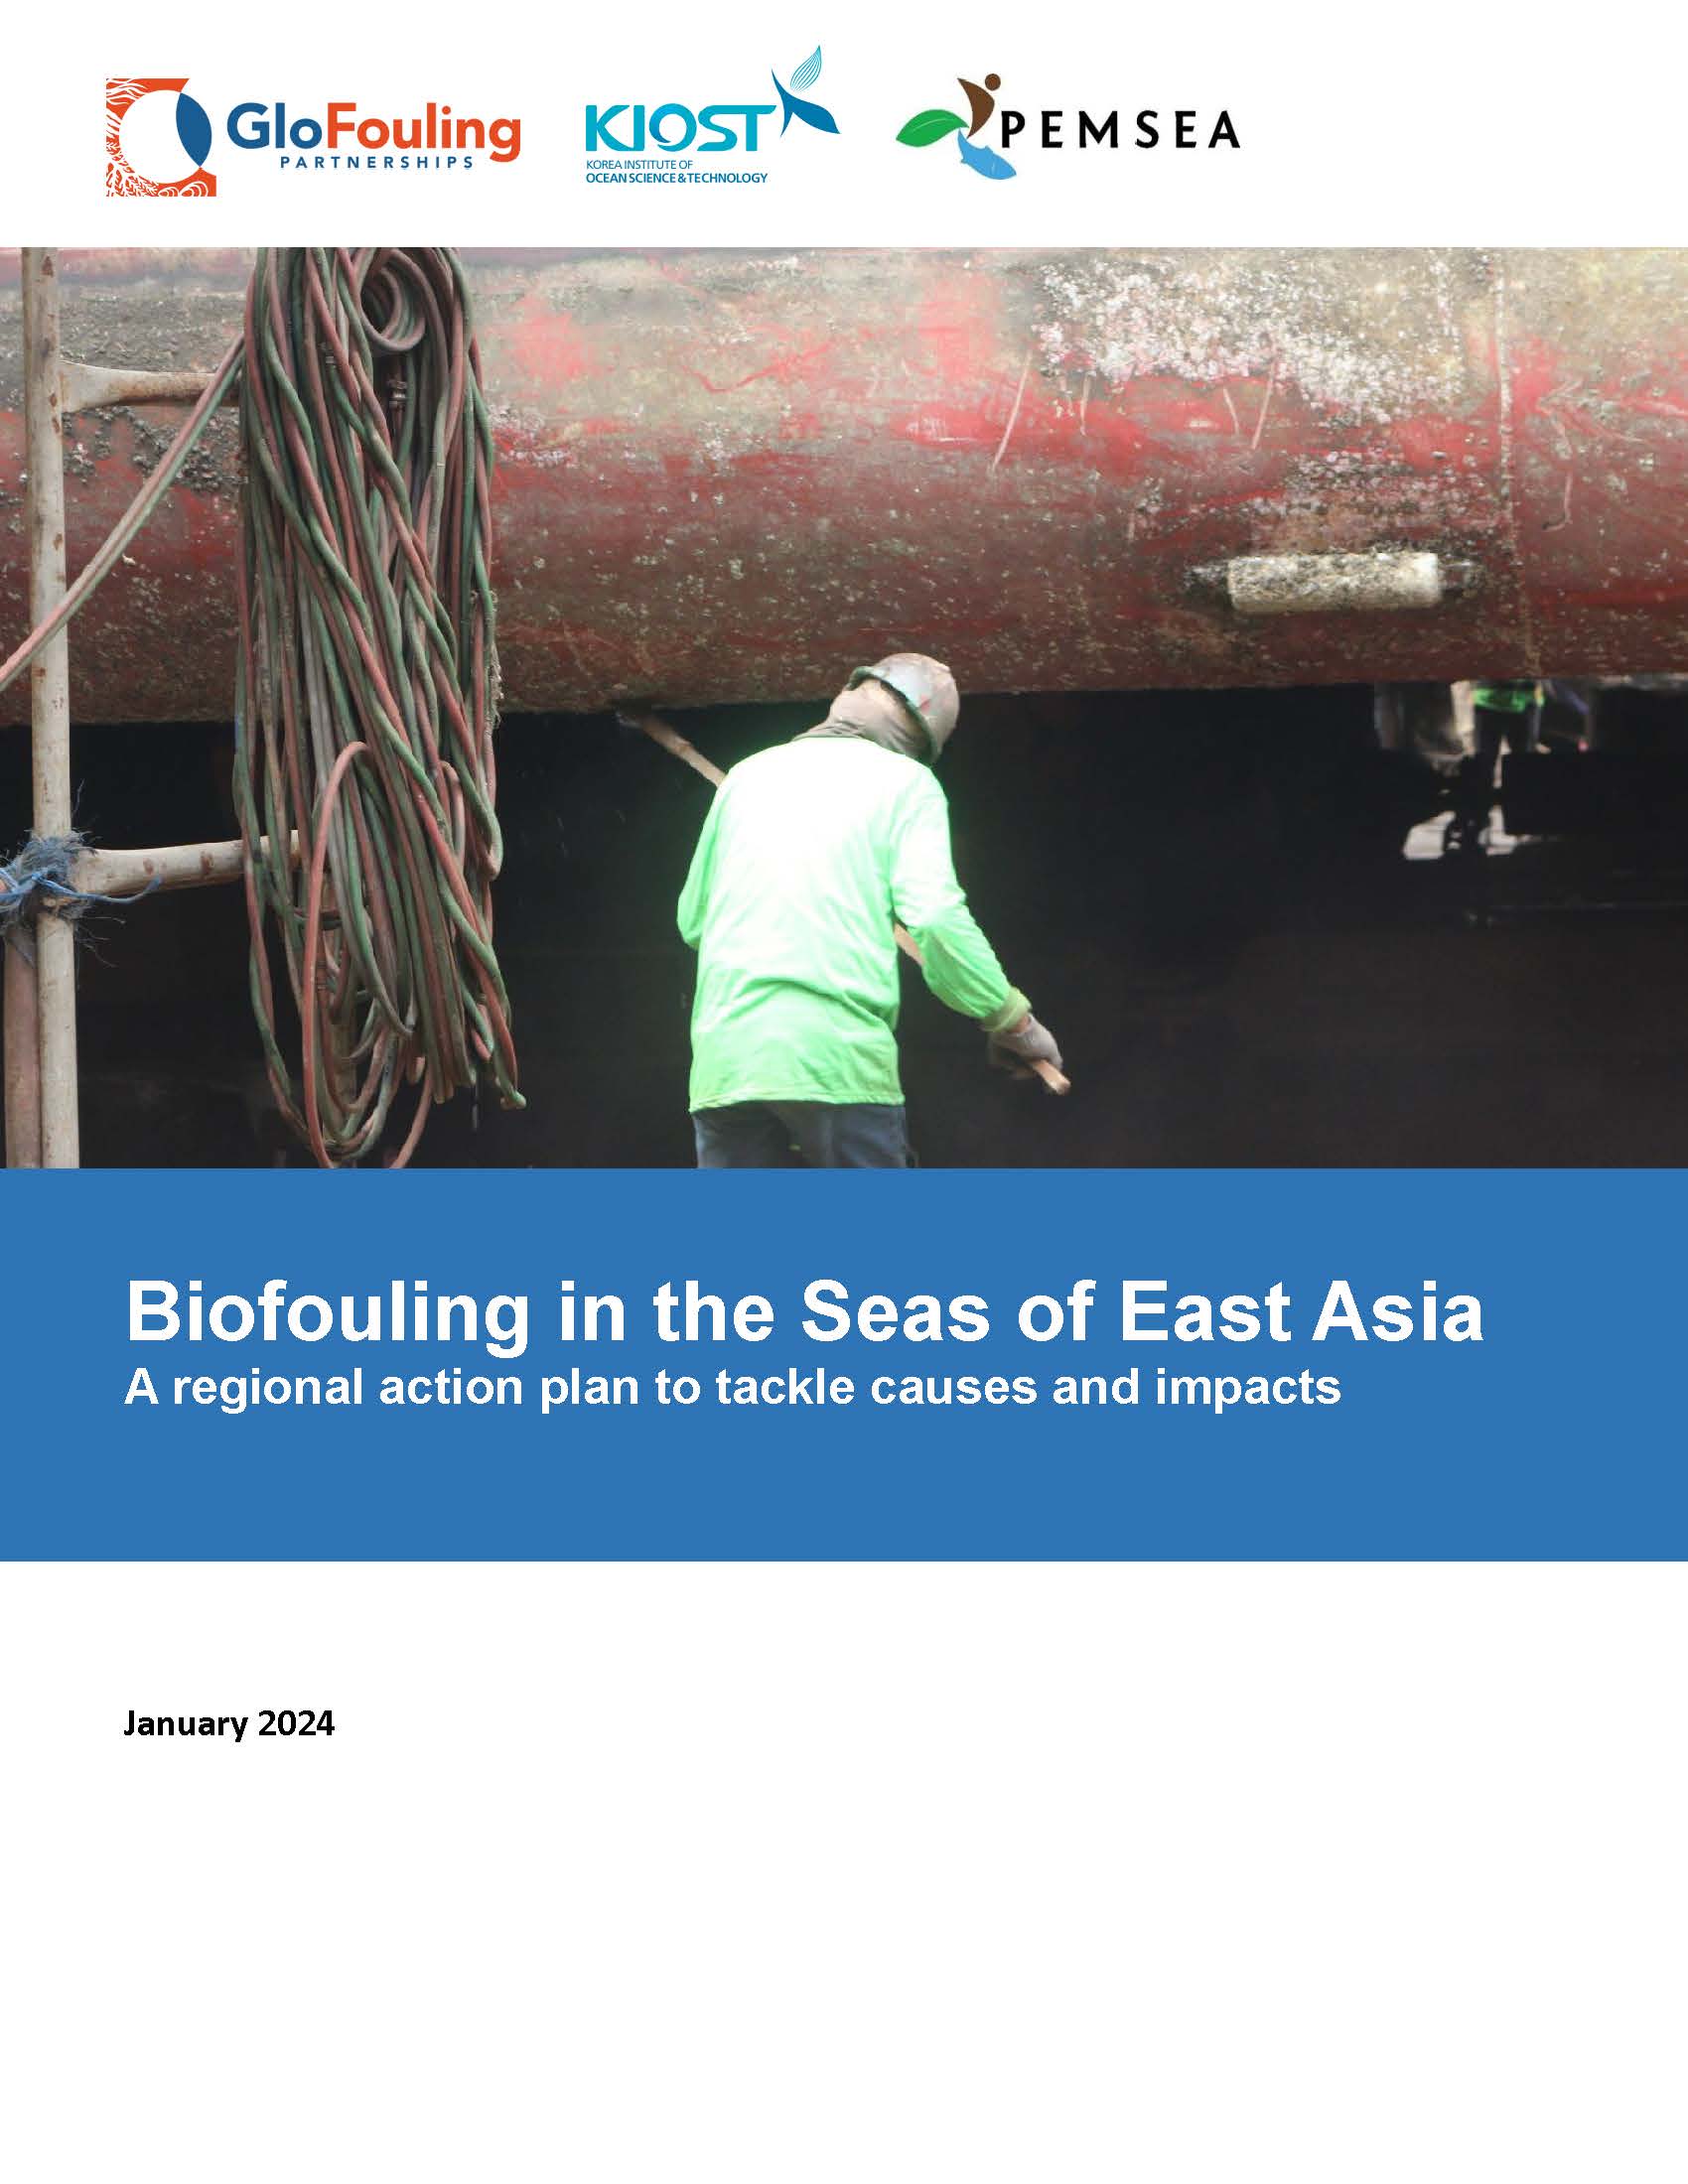 Biofouling Management in the Seas of East Asia  Regional Action Plan